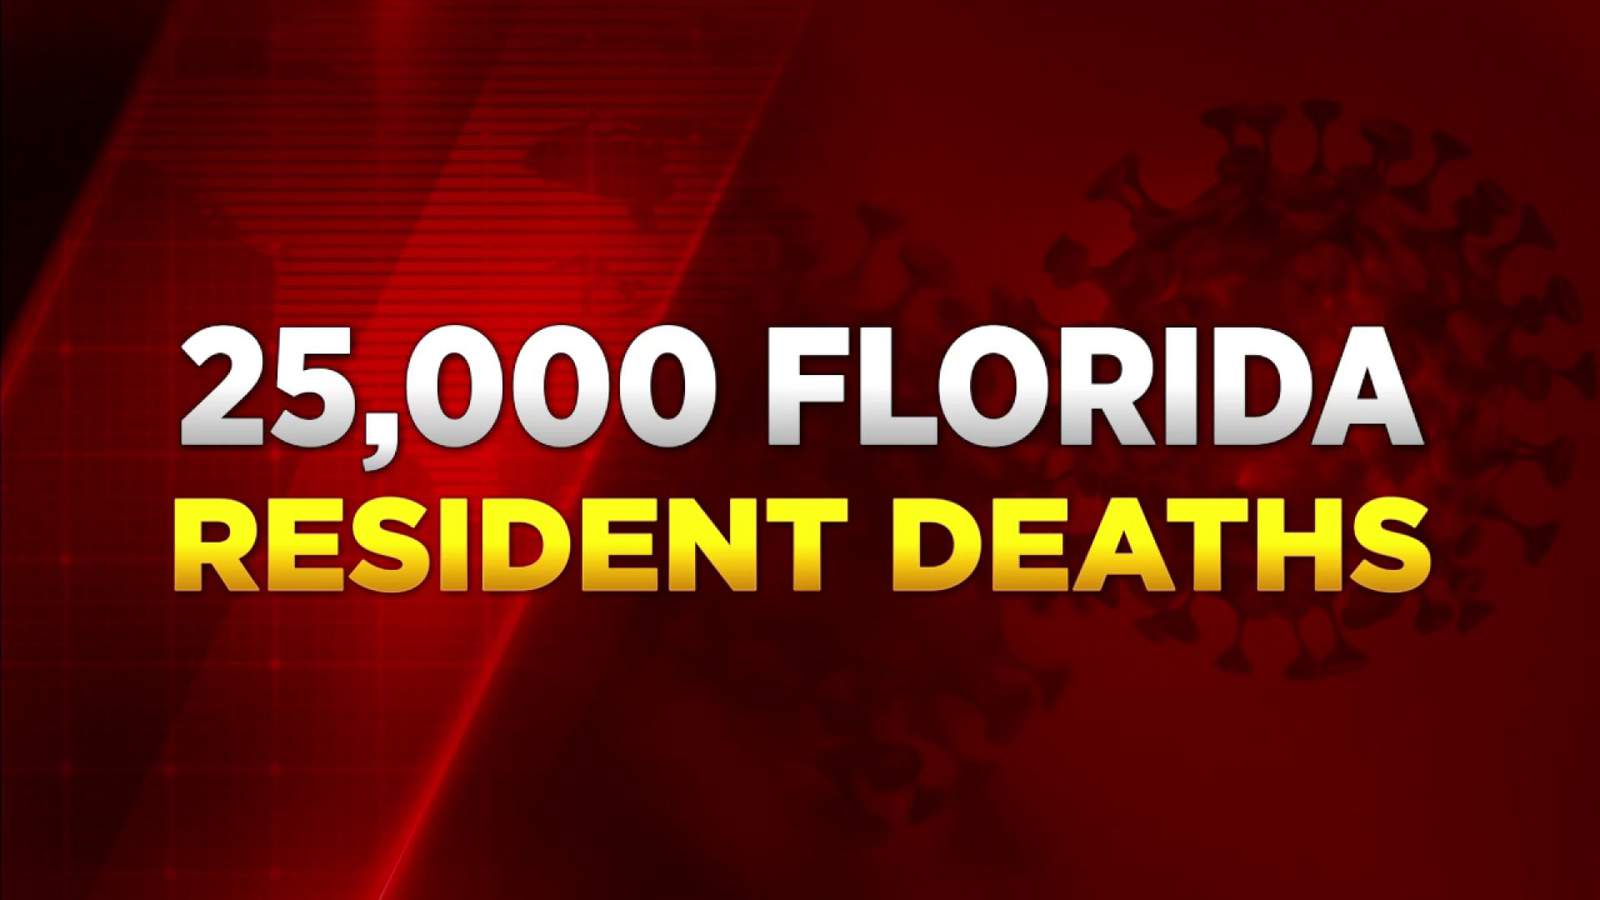 Florida has passed 25,000 coronavirus deaths, adding 13,719 cases and 272 deaths on Friday